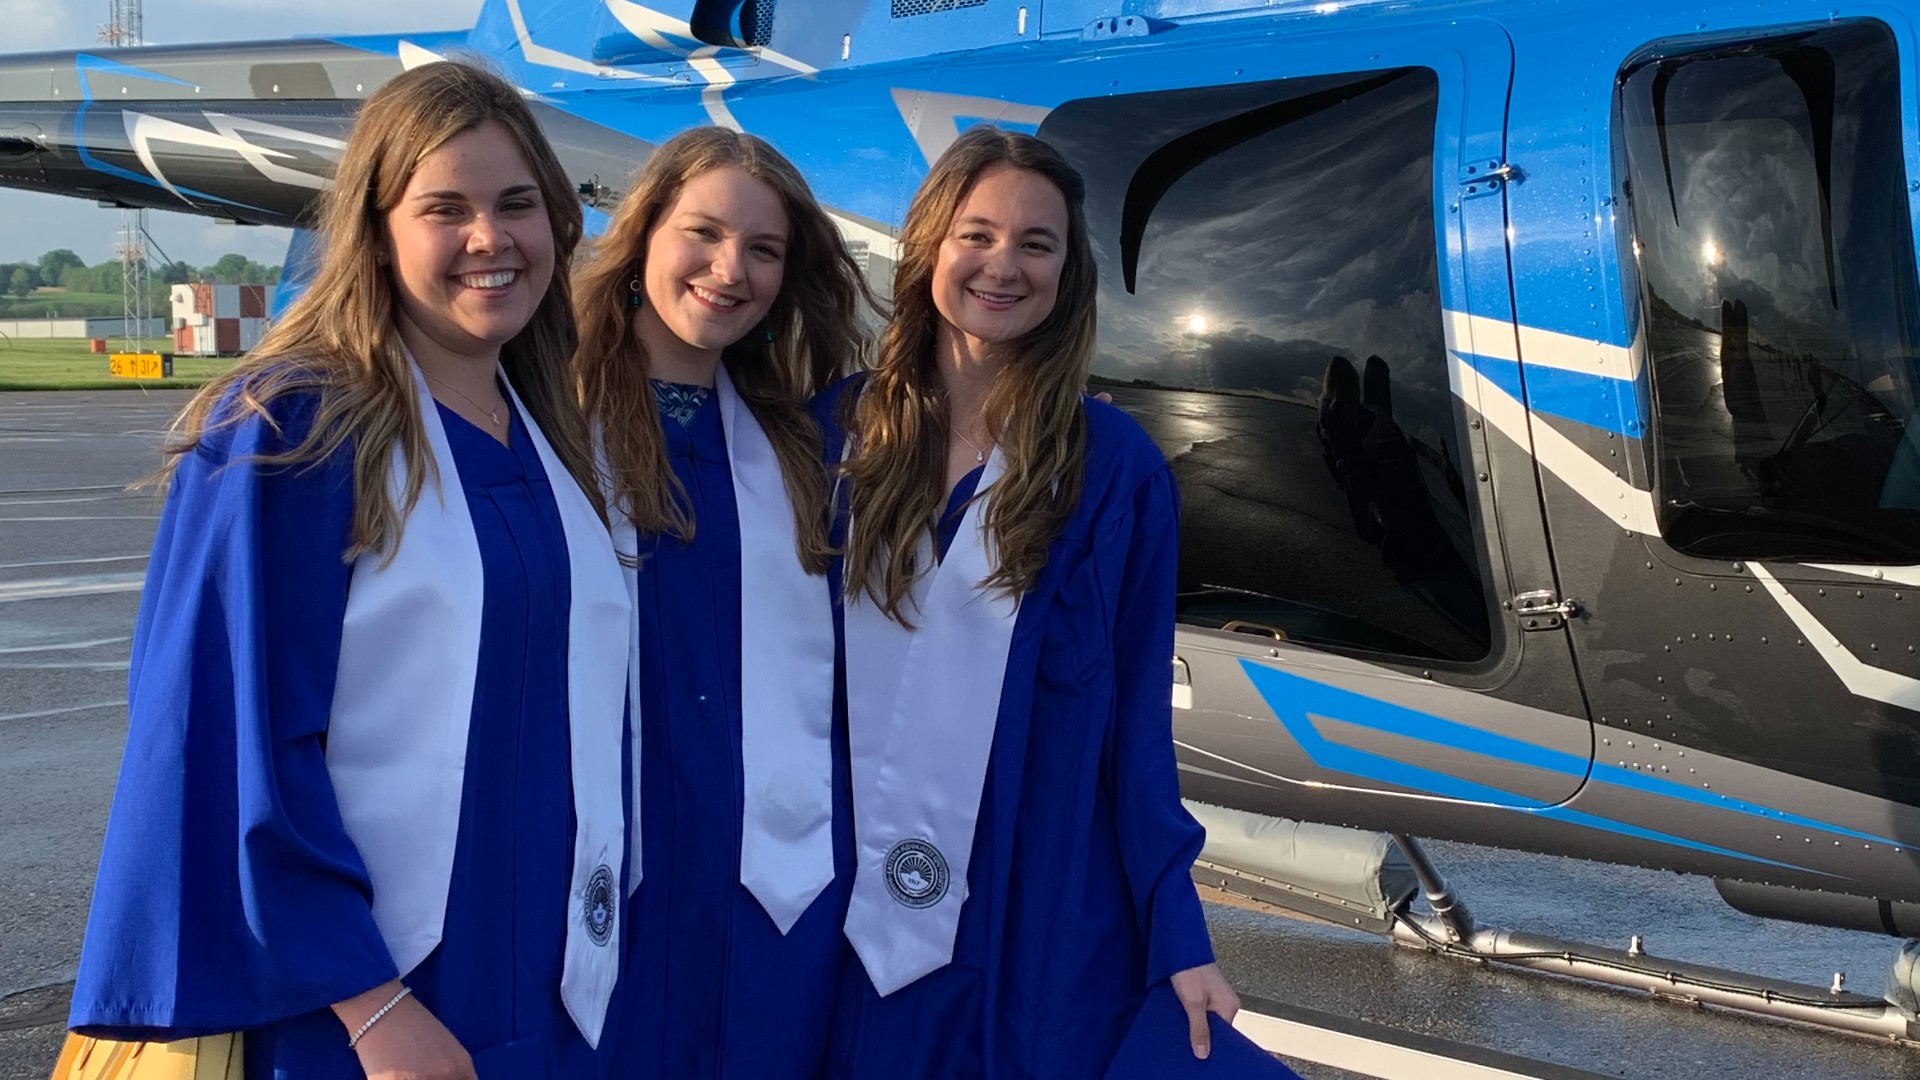 Eastern Mennonite University's first aviation students celebrated graduation with one last helicopter ride.